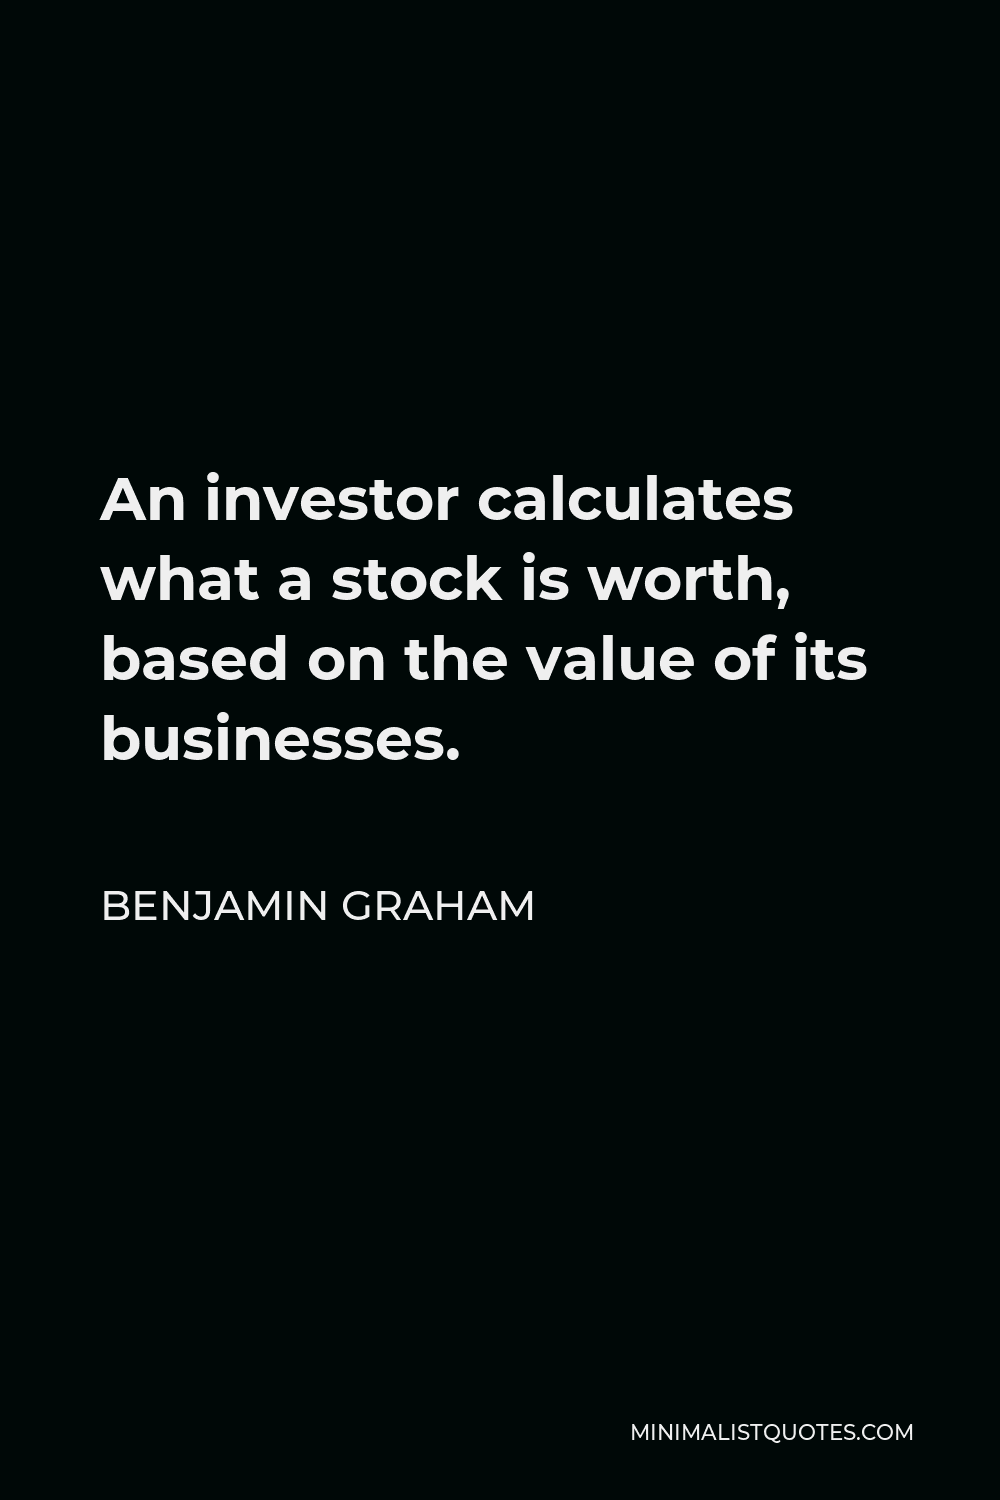 Benjamin Graham Quote - An investor calculates what a stock is worth, based on the value of its businesses.